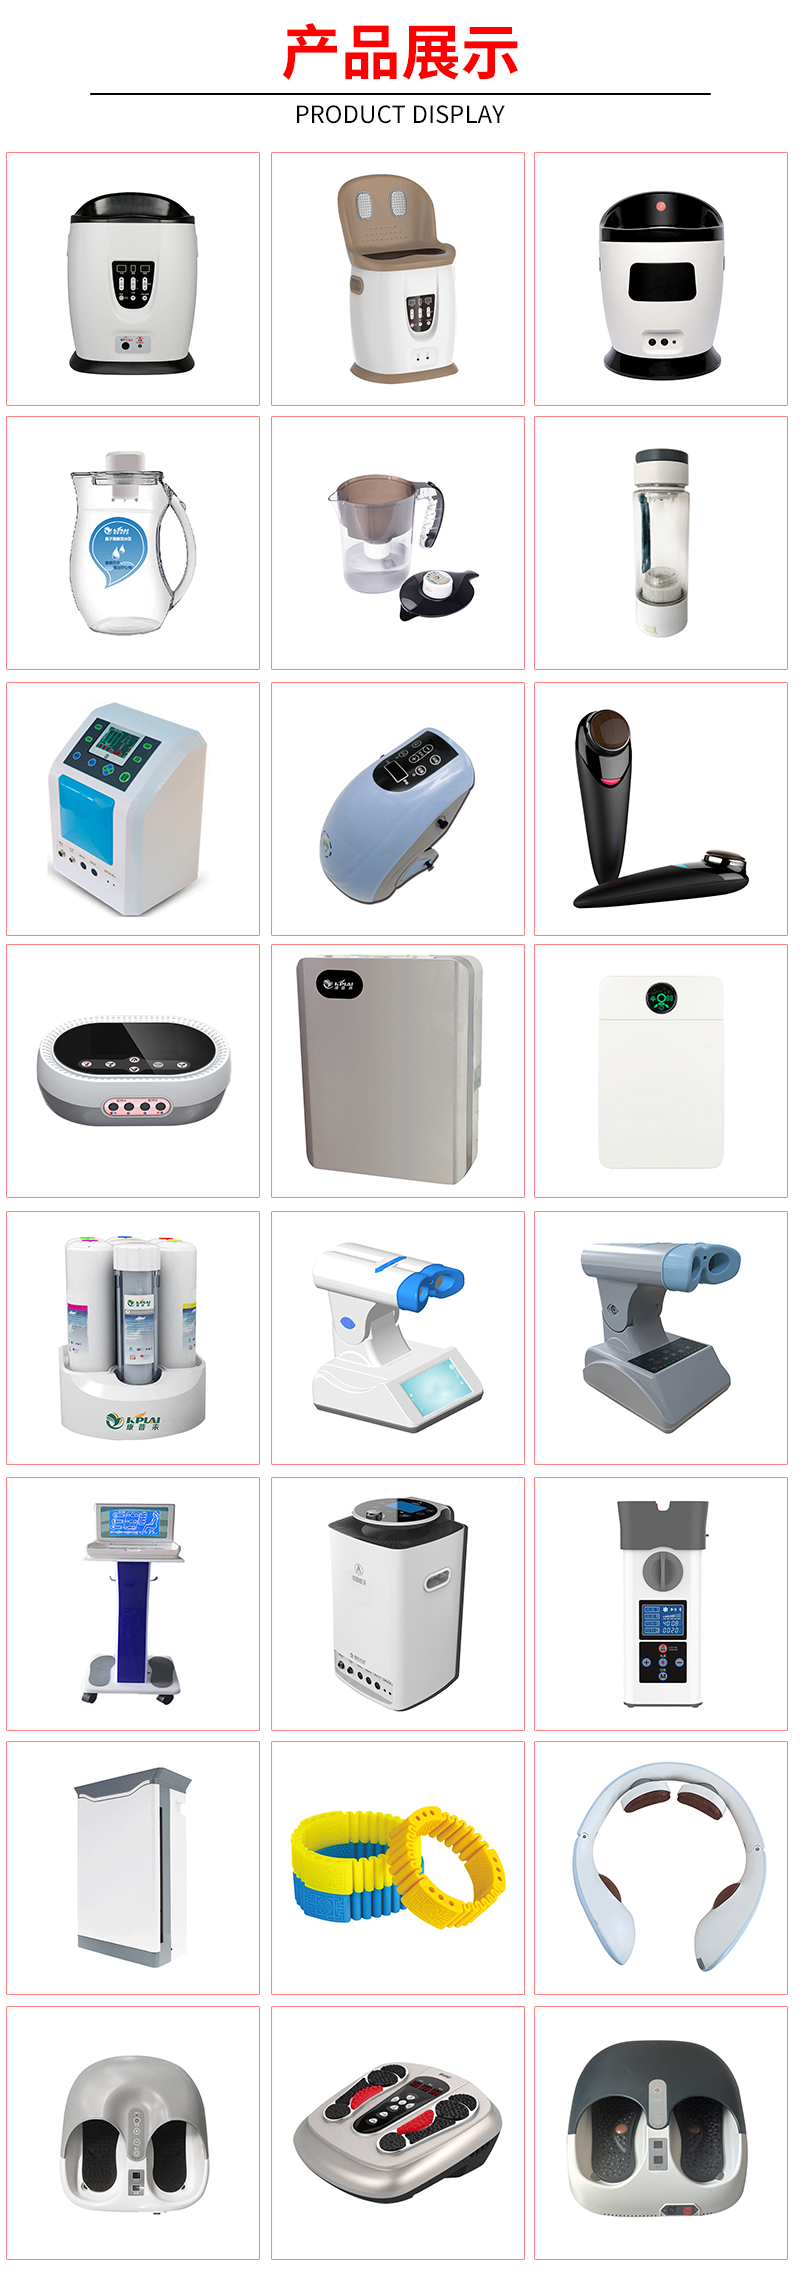 Negative ion Air Purifier New Intelligent Silent Disinfection, Odor Removal, and Smoke Removal Home Integrated Machine